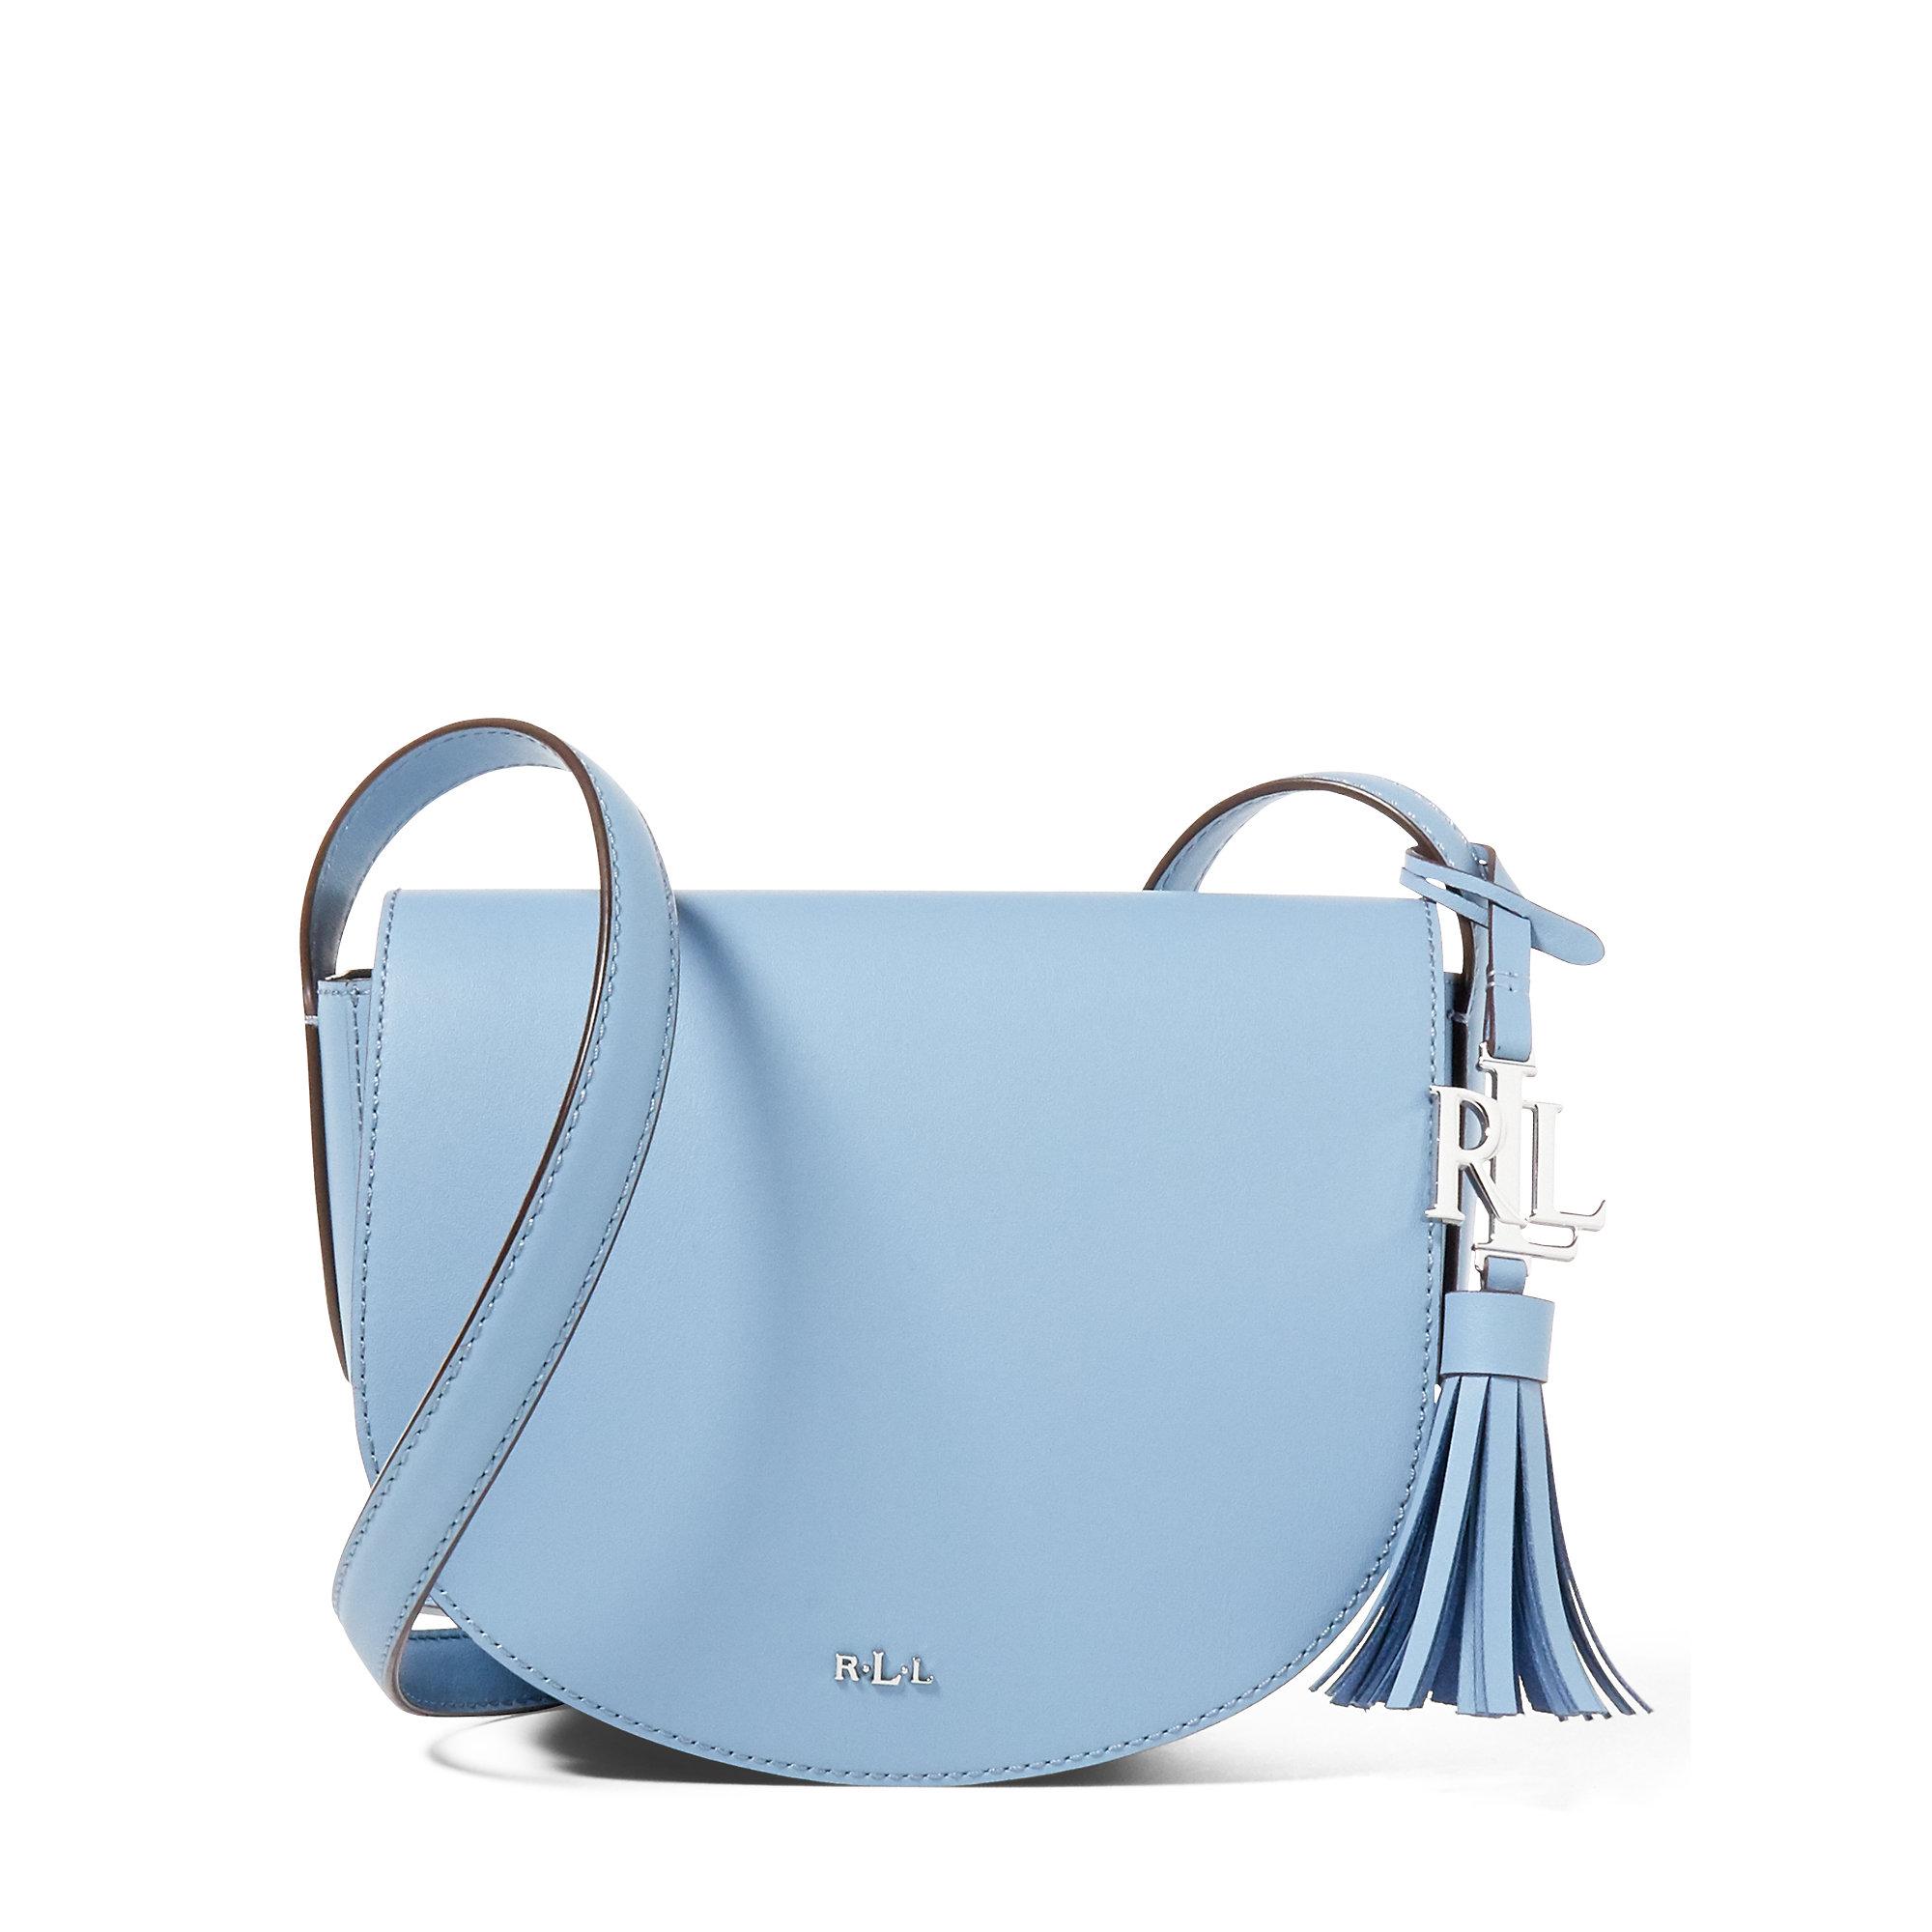 Ralph Lauren Leather Mini Caley Saddle Bag in Blue - Lyst